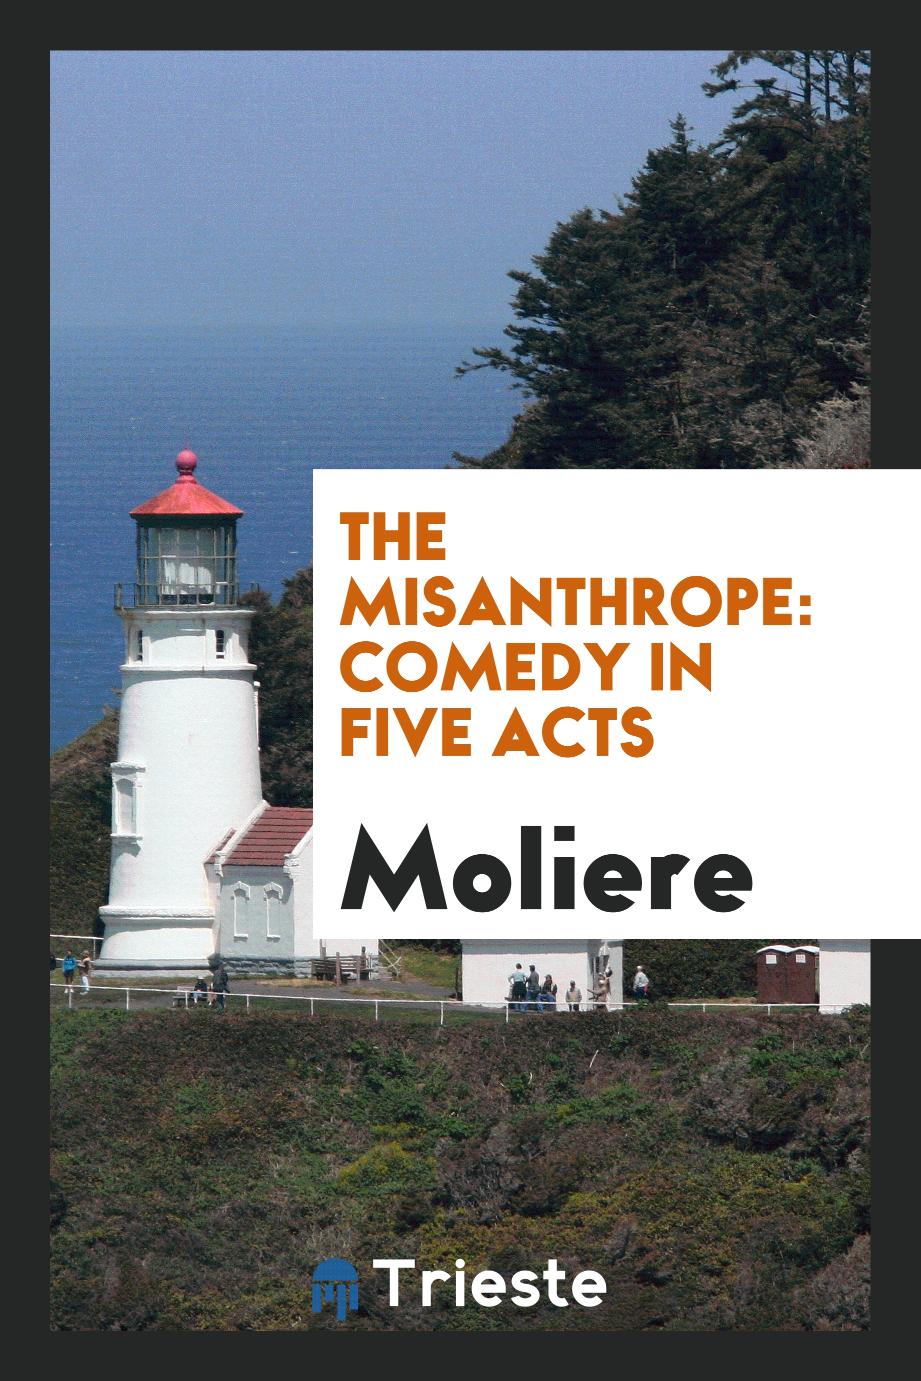 Molière - The misanthrope: comedy in five acts